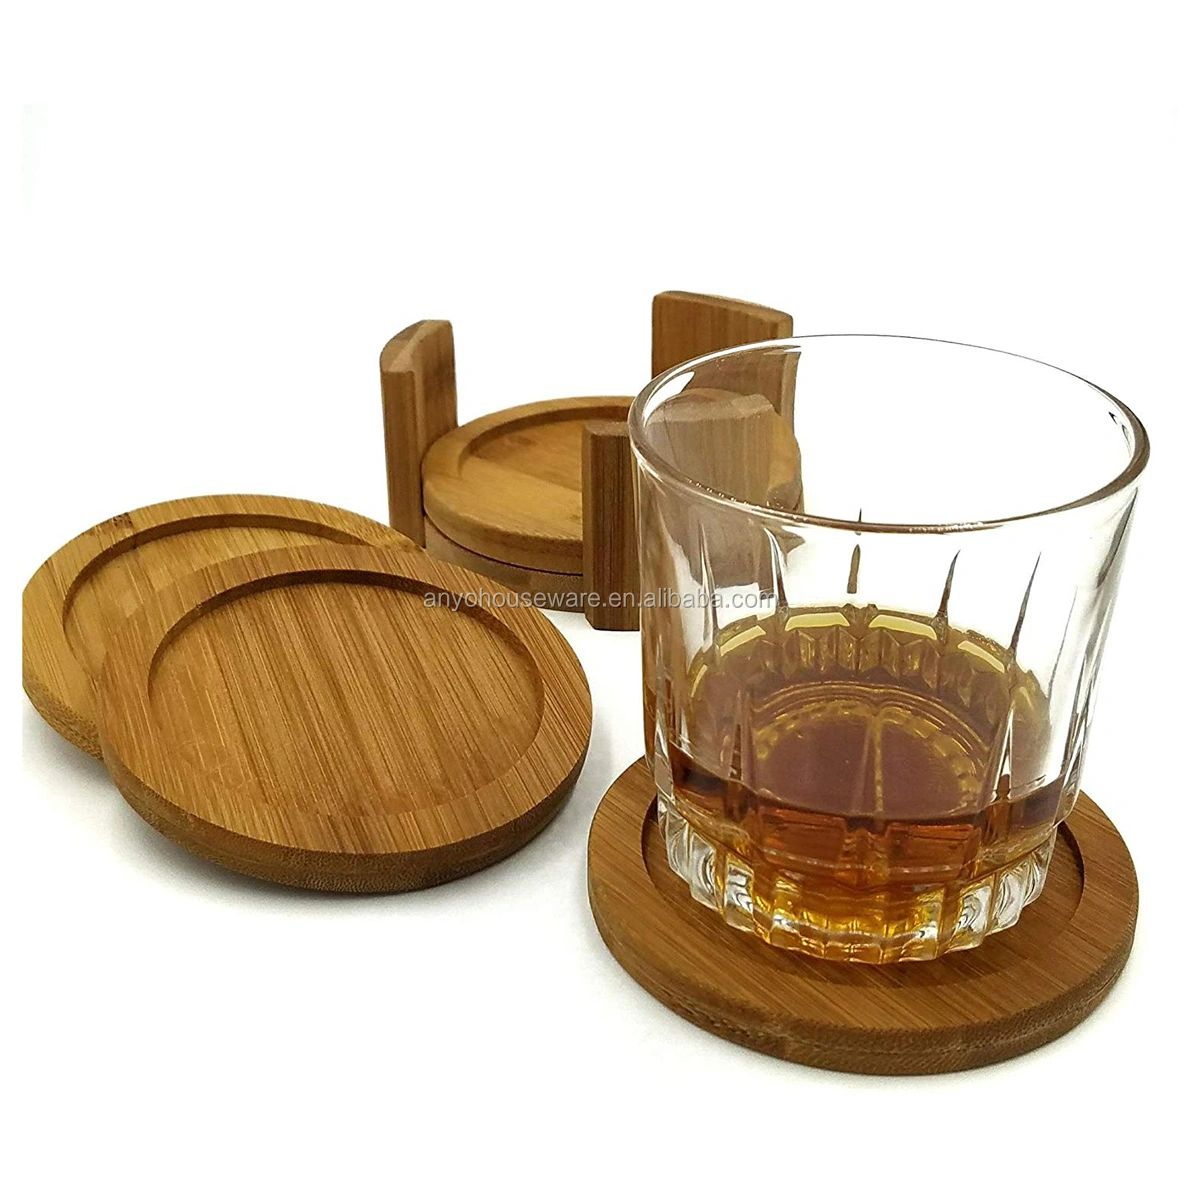 Wholesale Natural Custom Printed Round Bamboo Coasters and Holder for Drinks, Beverages, Beer, Coffee